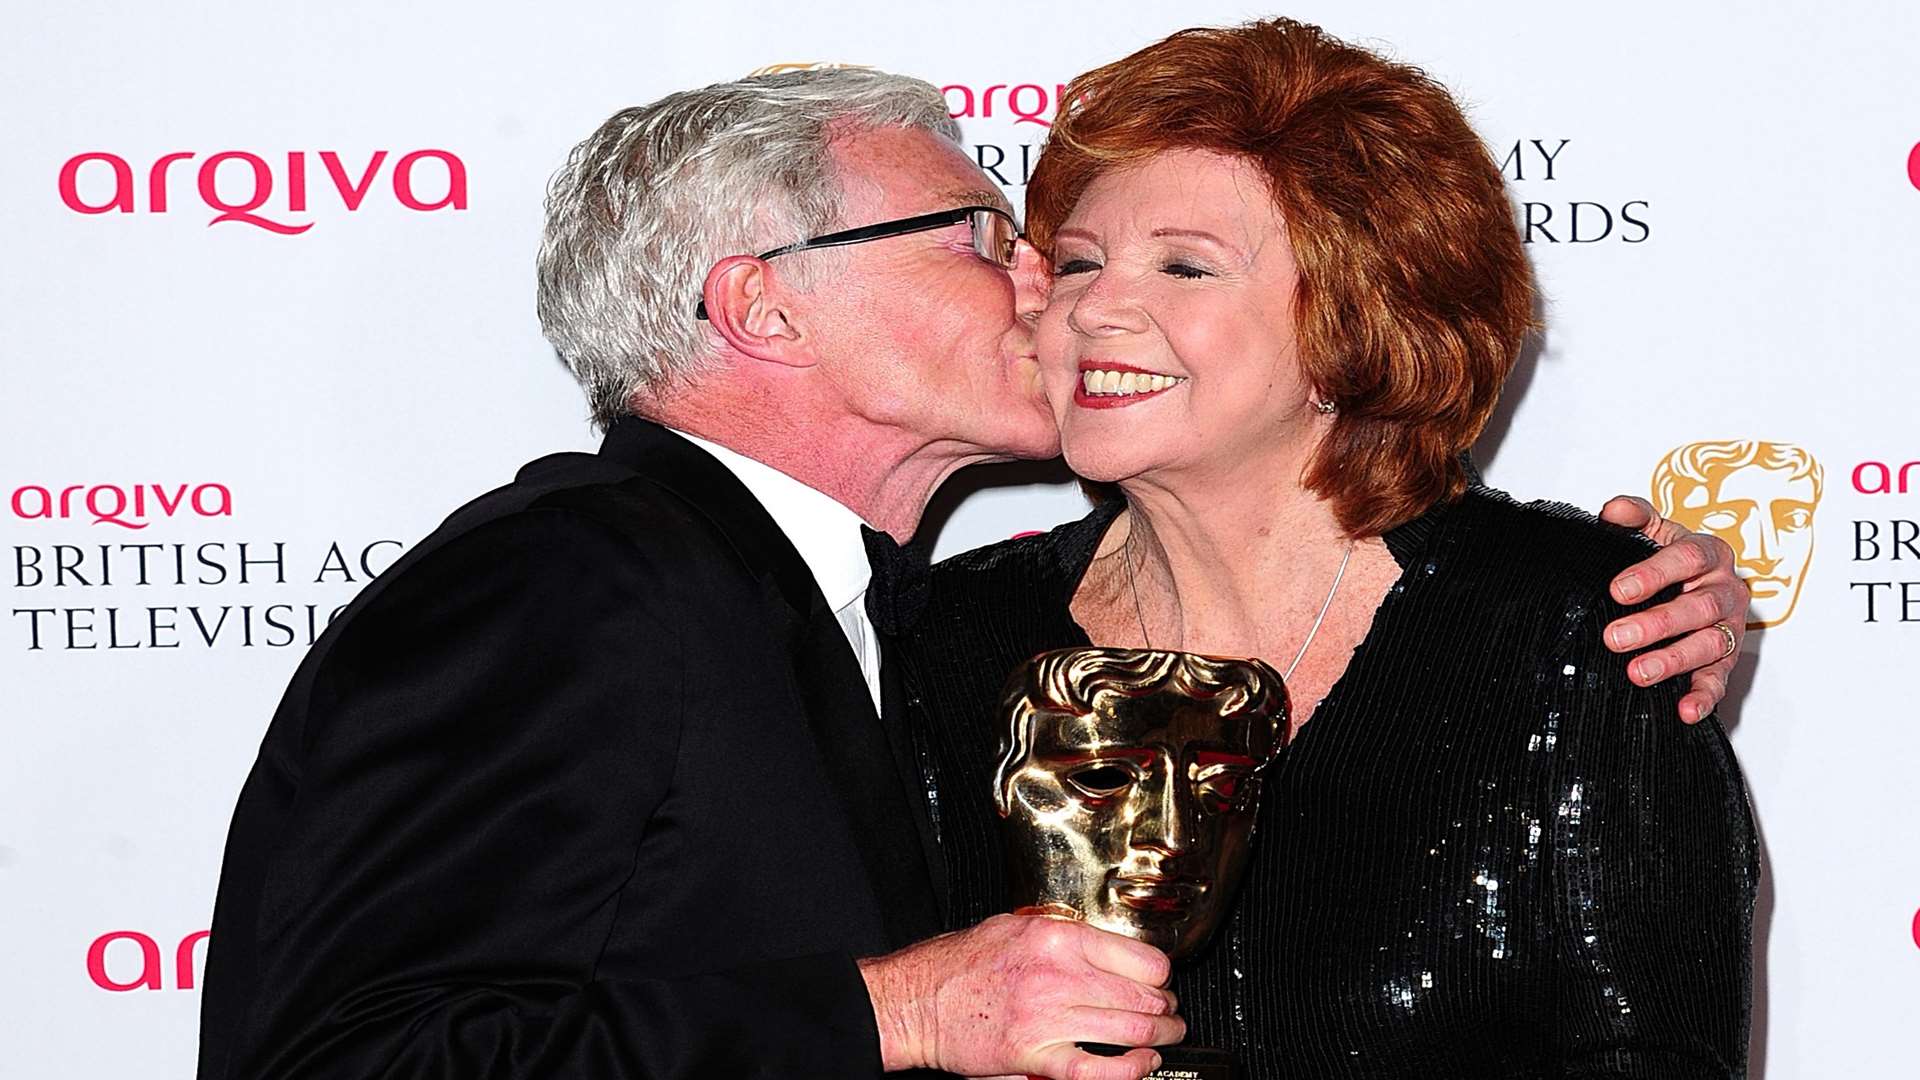 Paul O'Grady with his great friend, Cilla Black, at the Arqiva British Academy Television Awards 2014 Picture: Ian West/PA Photos